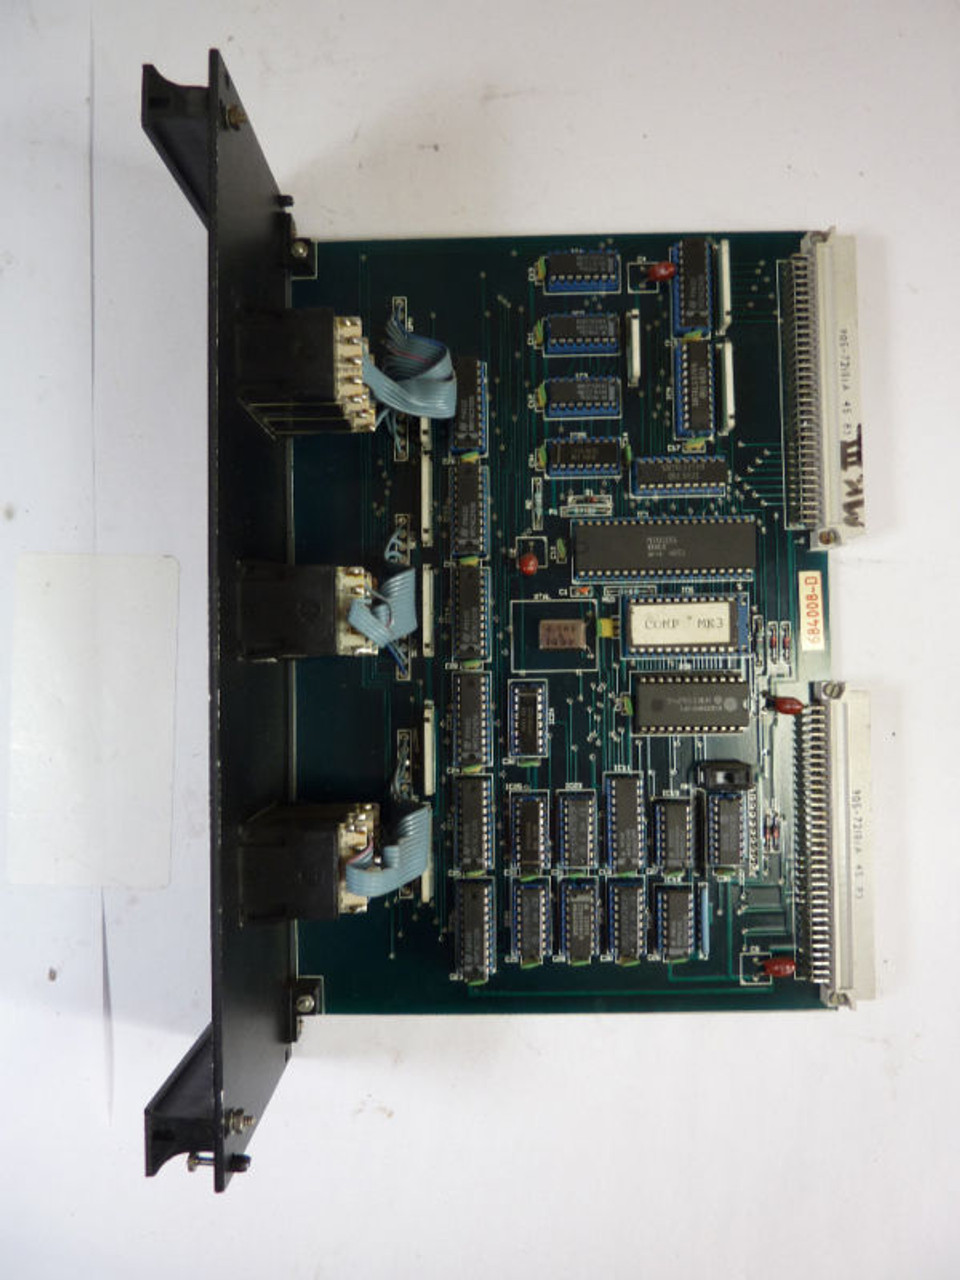 Comparator Mark 3 684008-D PLC PC222D3 Comp MK3 USED